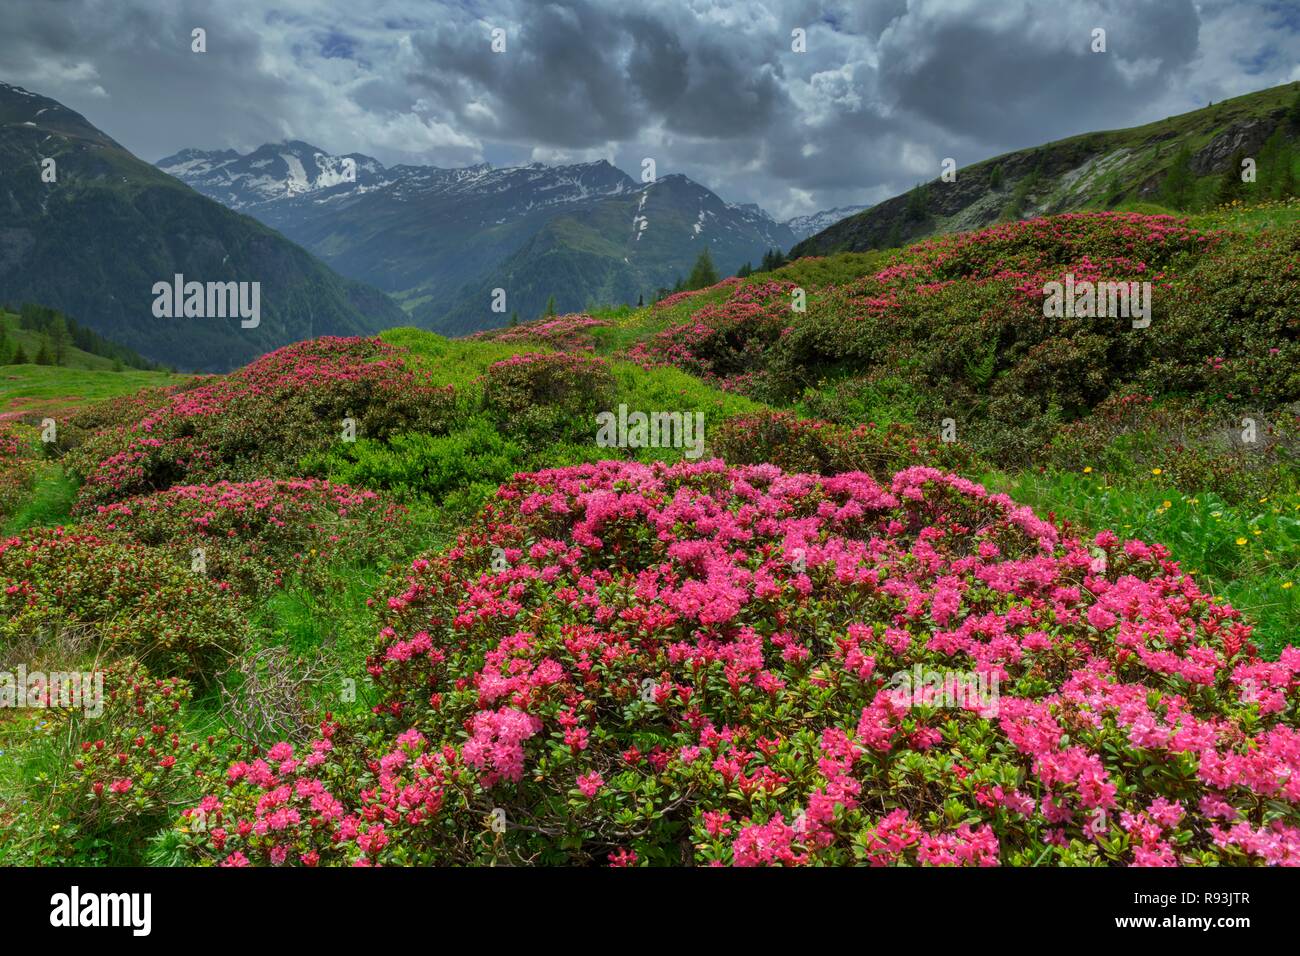 Rusty-leaved alpenrose (Rhododendron ferrugineum), flowering, stormy atmosphere, Hohe Tauern National Park, Carinthia, Austria Stock Photo